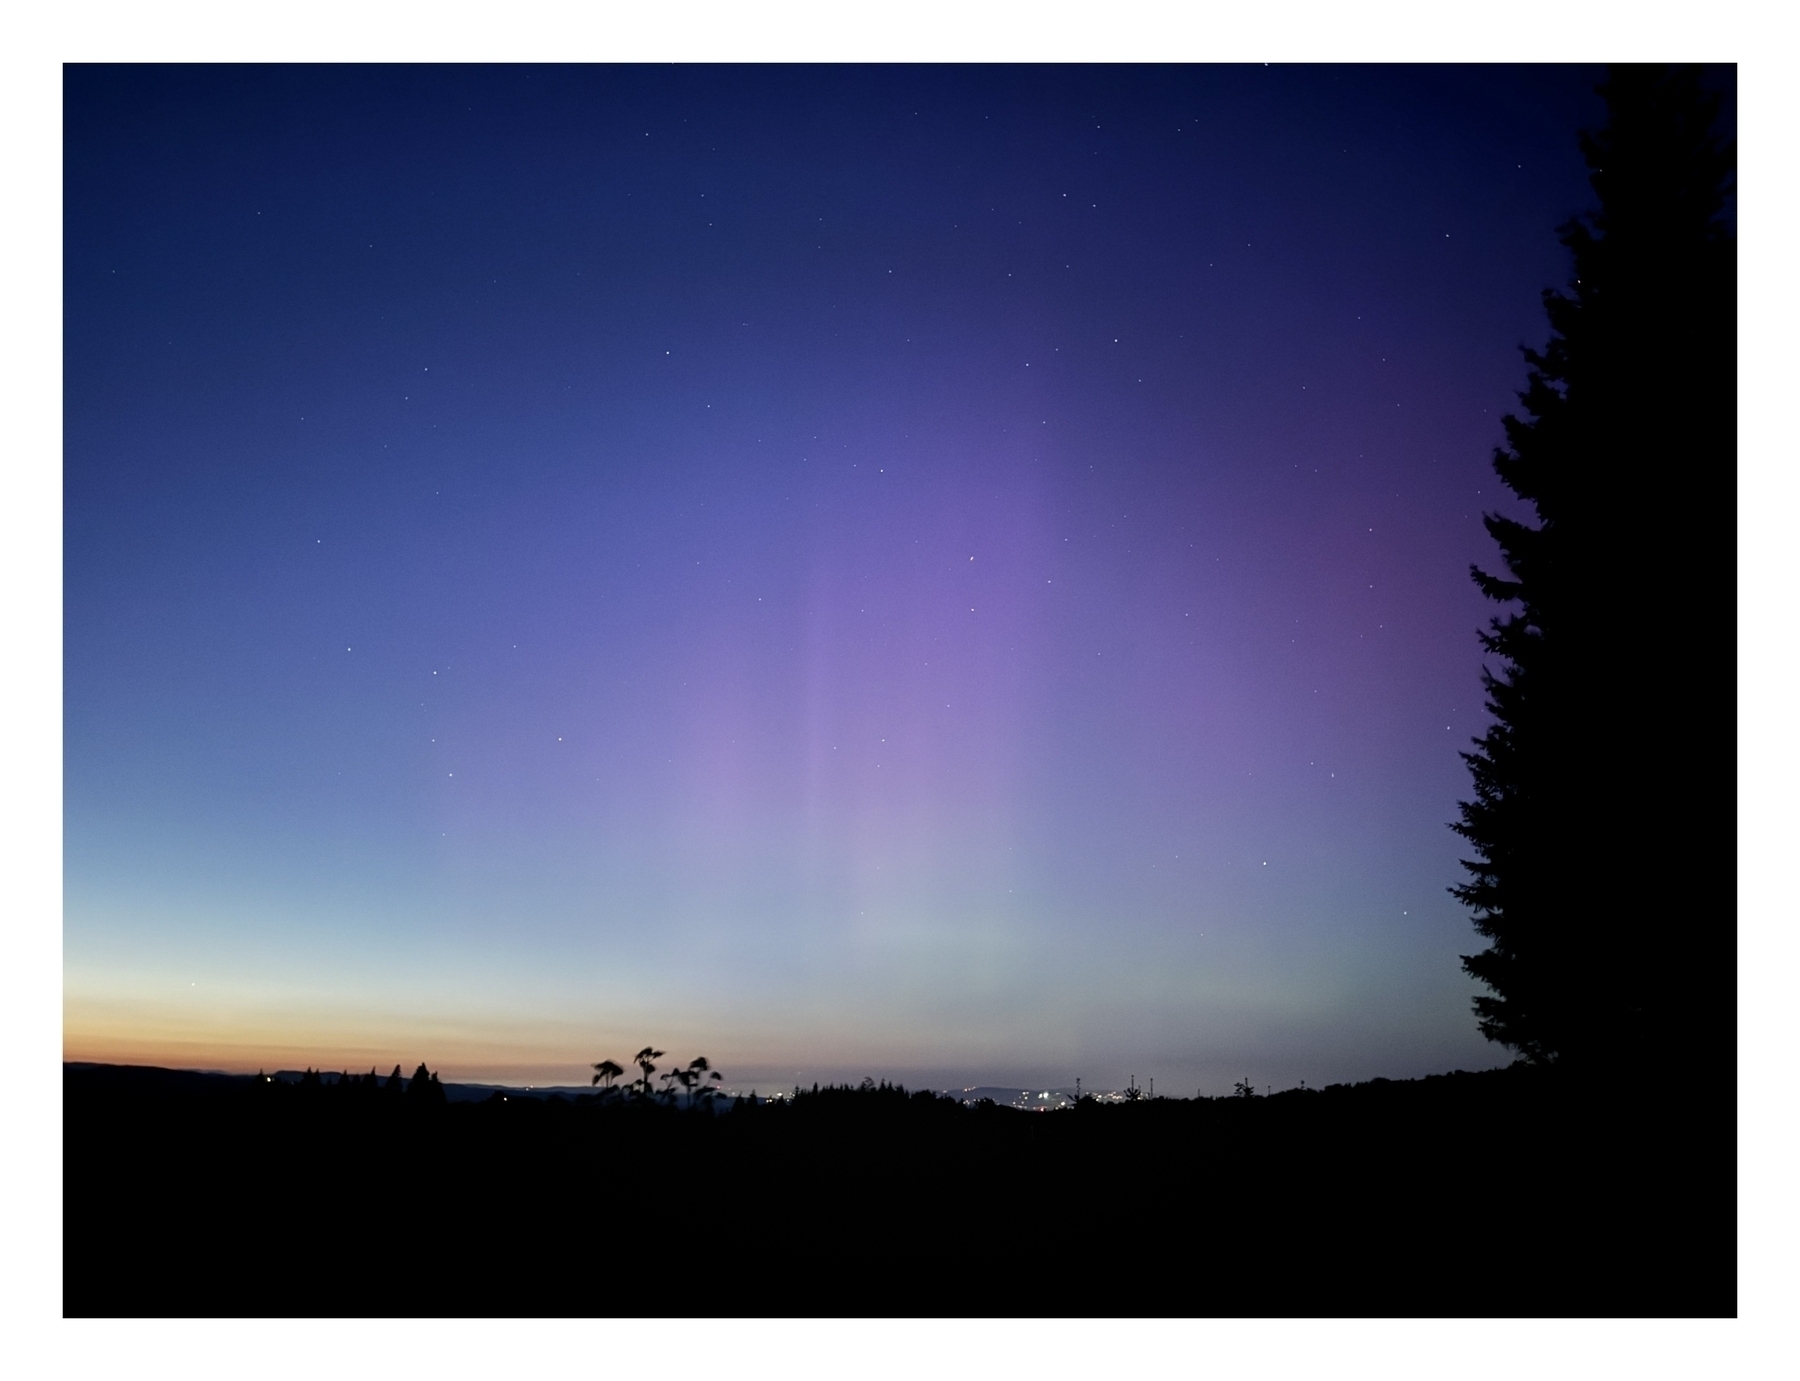 Aurora borealis streaks across a twilight sky above a silhouetted landscape with trees.